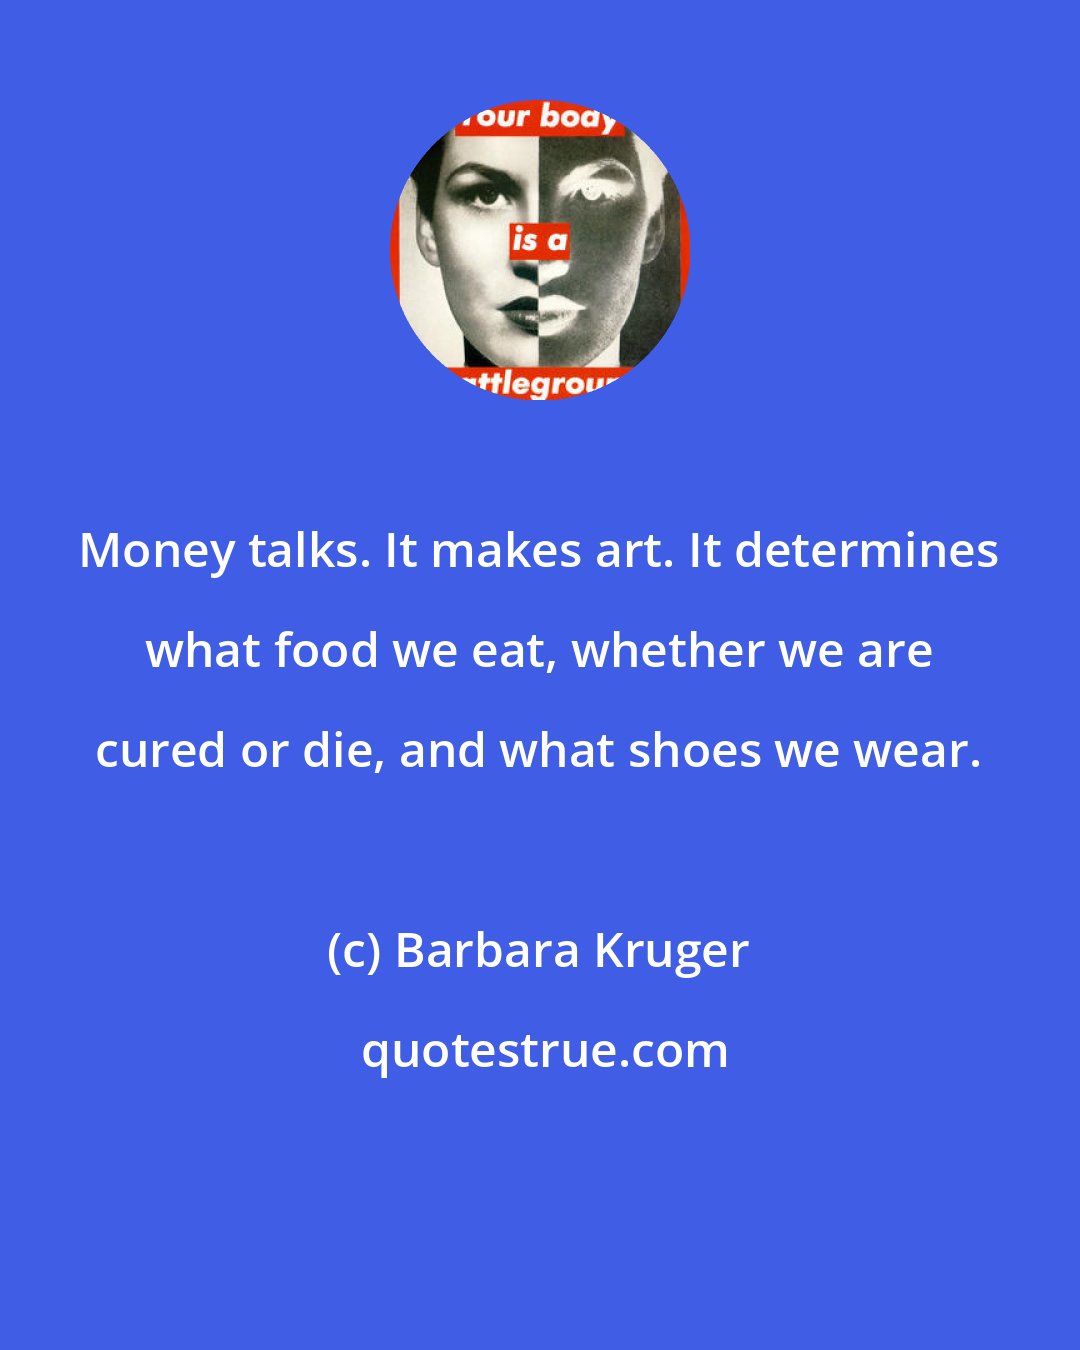 Barbara Kruger: Money talks. It makes art. It determines what food we eat, whether we are cured or die, and what shoes we wear.